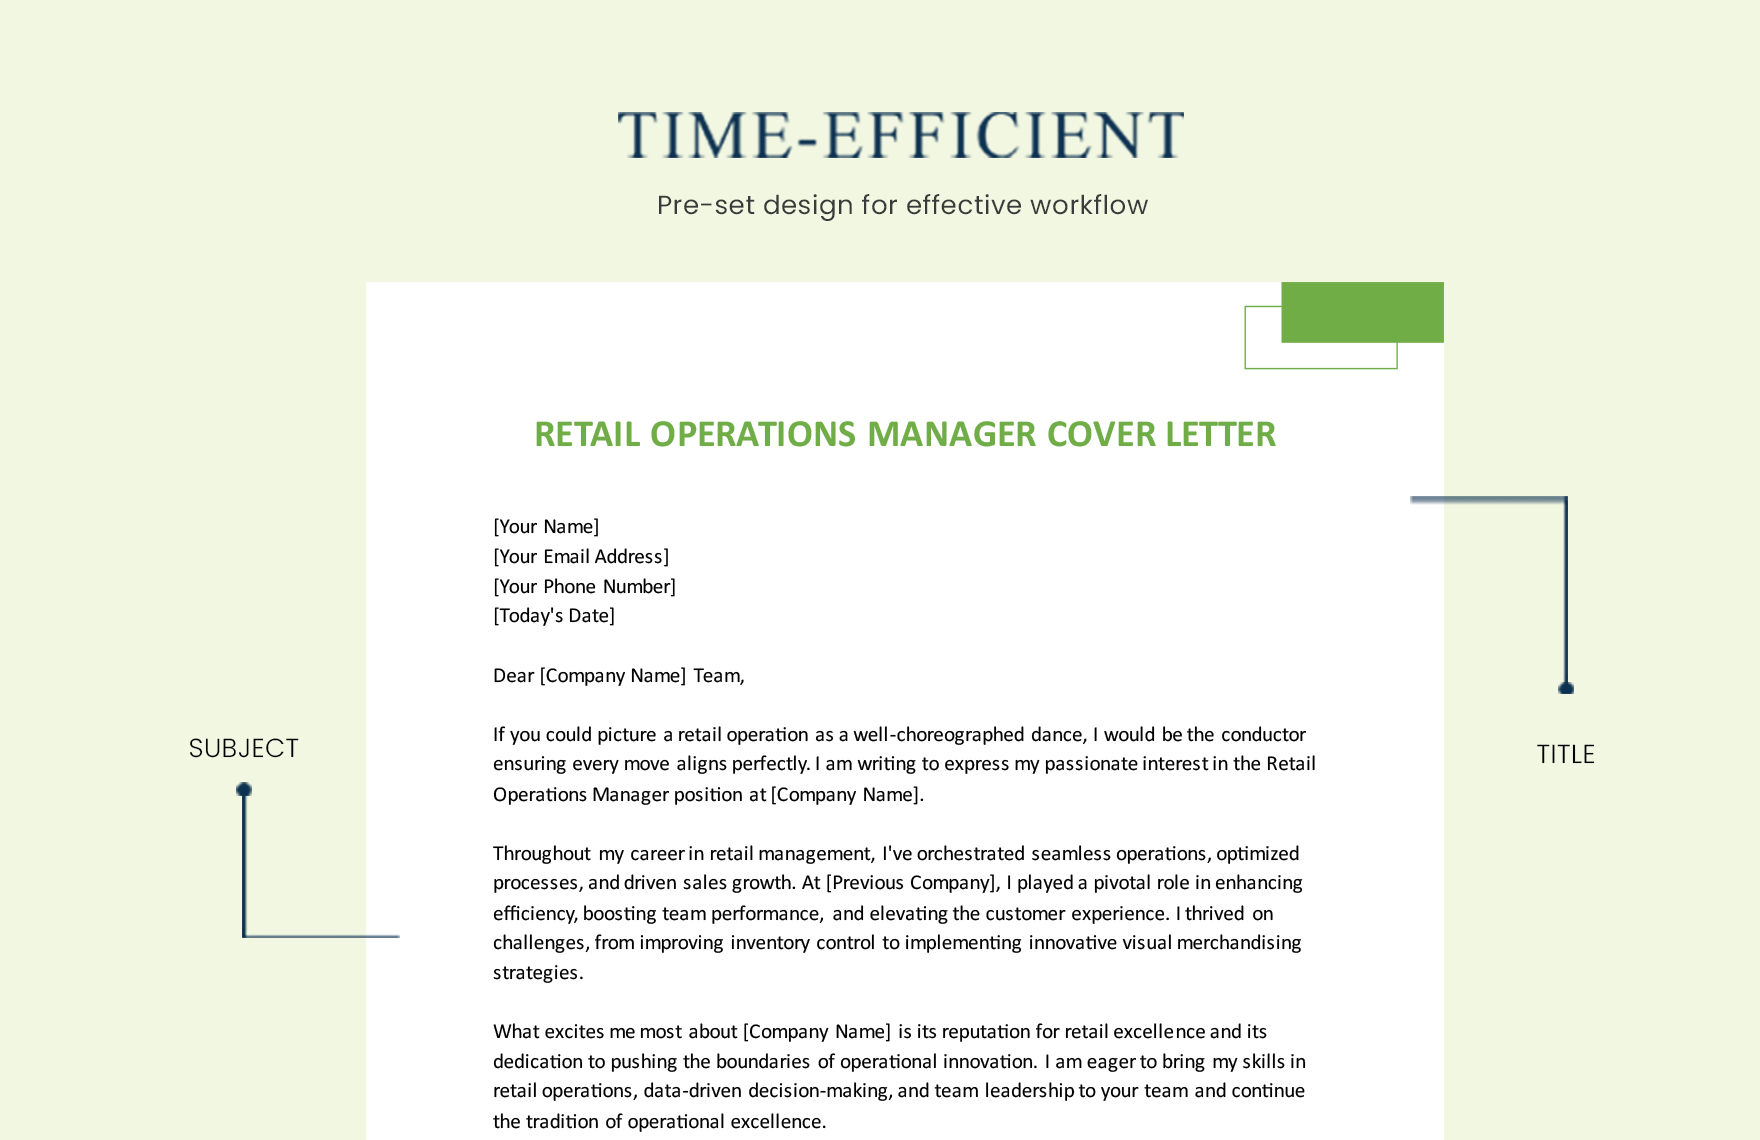 Retail Operations Manager Cover Letter